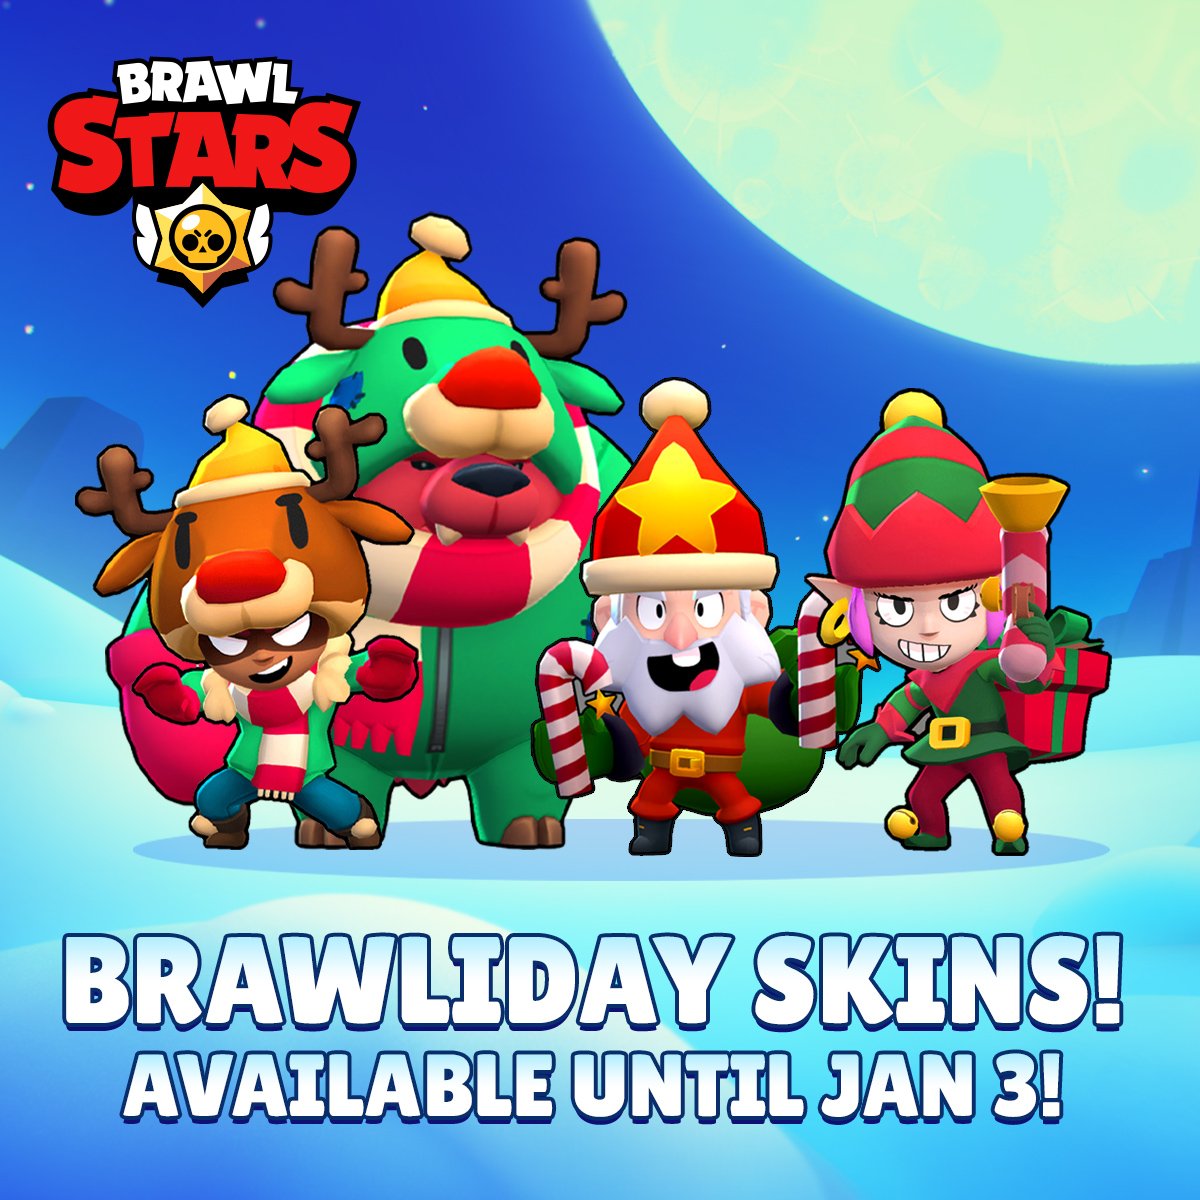 Brawl Stars On Twitter Happy Brawlidays Skins Available For Purchase For A Limited Time You Can Buy Them Now And Keep Them Forever However After January 3 Nobody Will Be Able To - brawl stars it skins